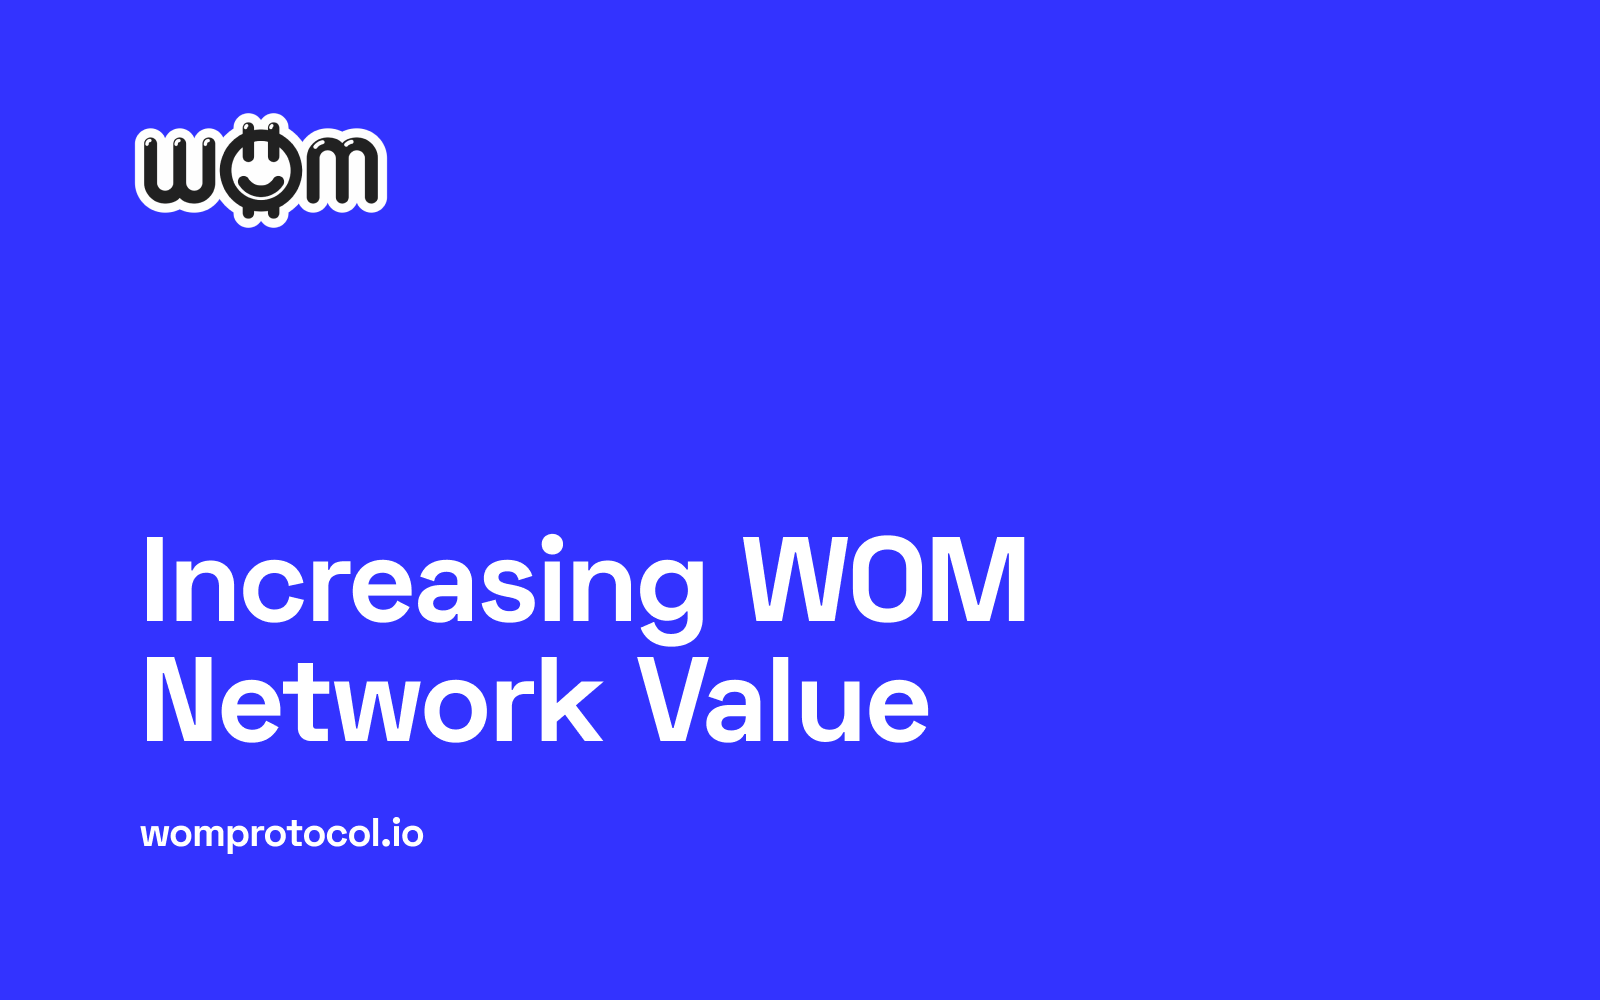 How WOM Is Increasing Network Value Through Incentivized Community Collaboration